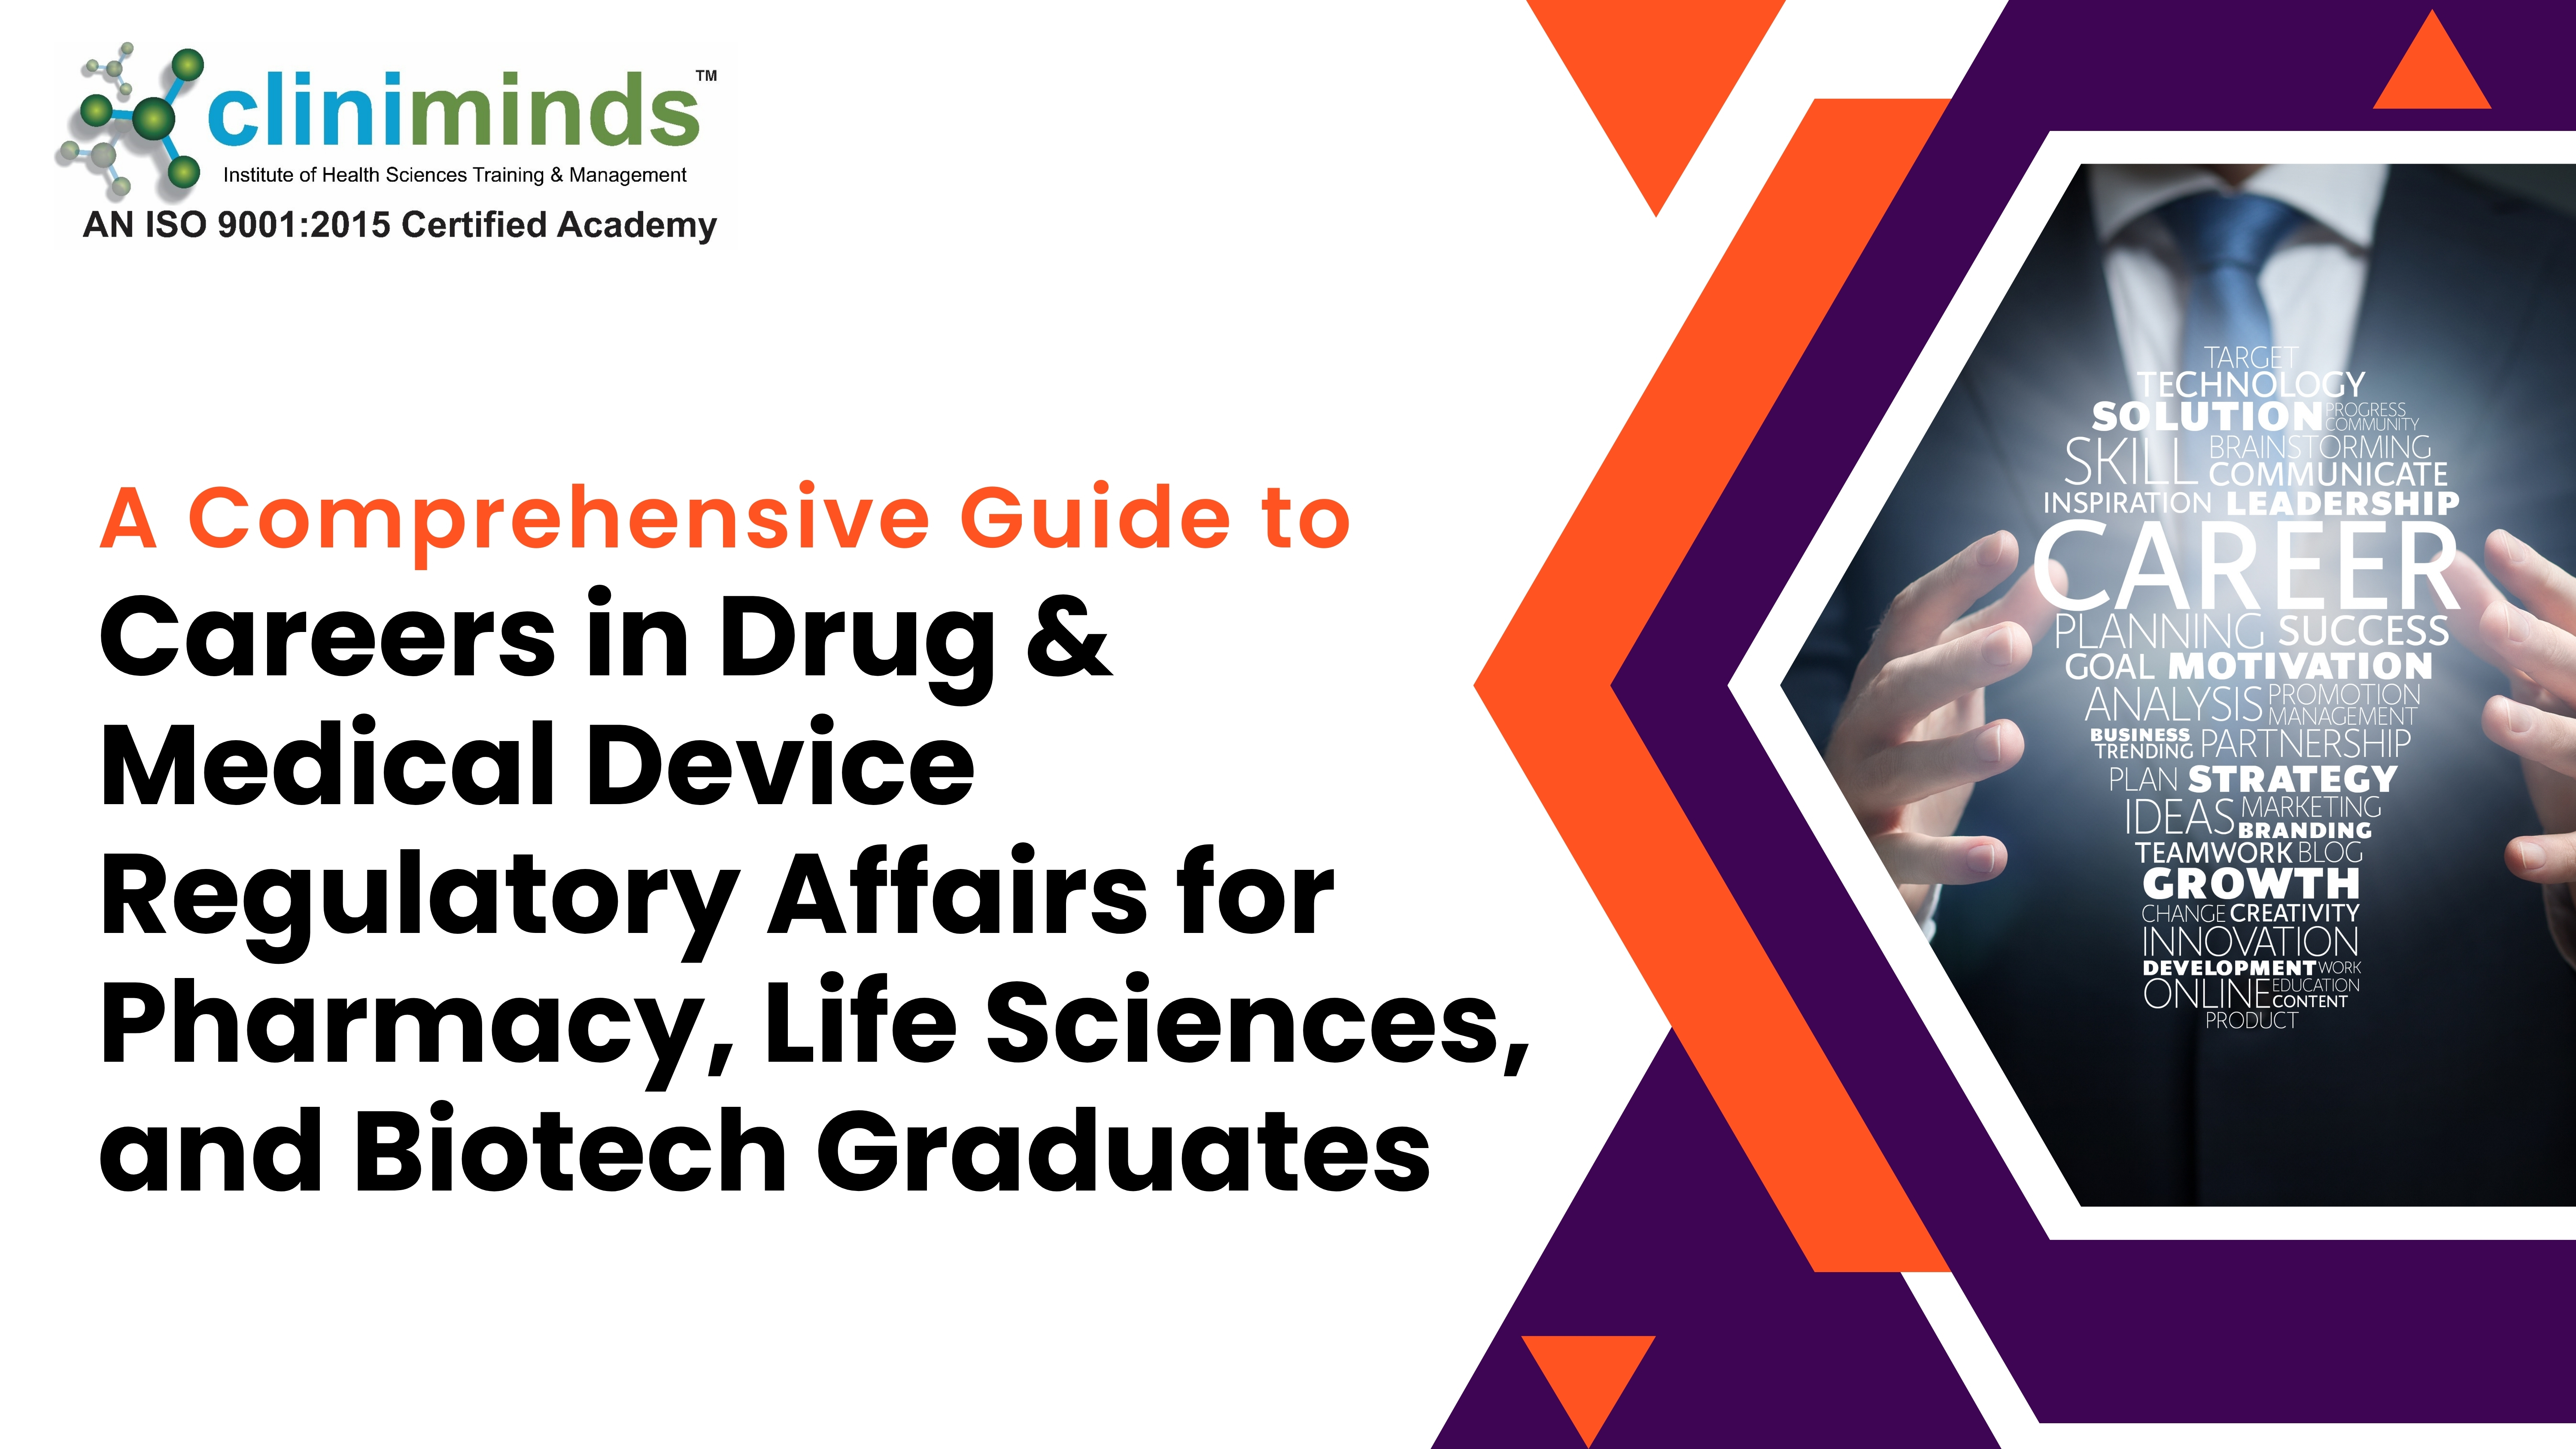 A COMPREHENSIVE GUIDE TO CAREERS IN DRUG & MEDICAL DEVICE REGULATORY AFFAIRS FOR PHARMACY, LIFE SCIENCES, AND BIOTECH GRADUATES